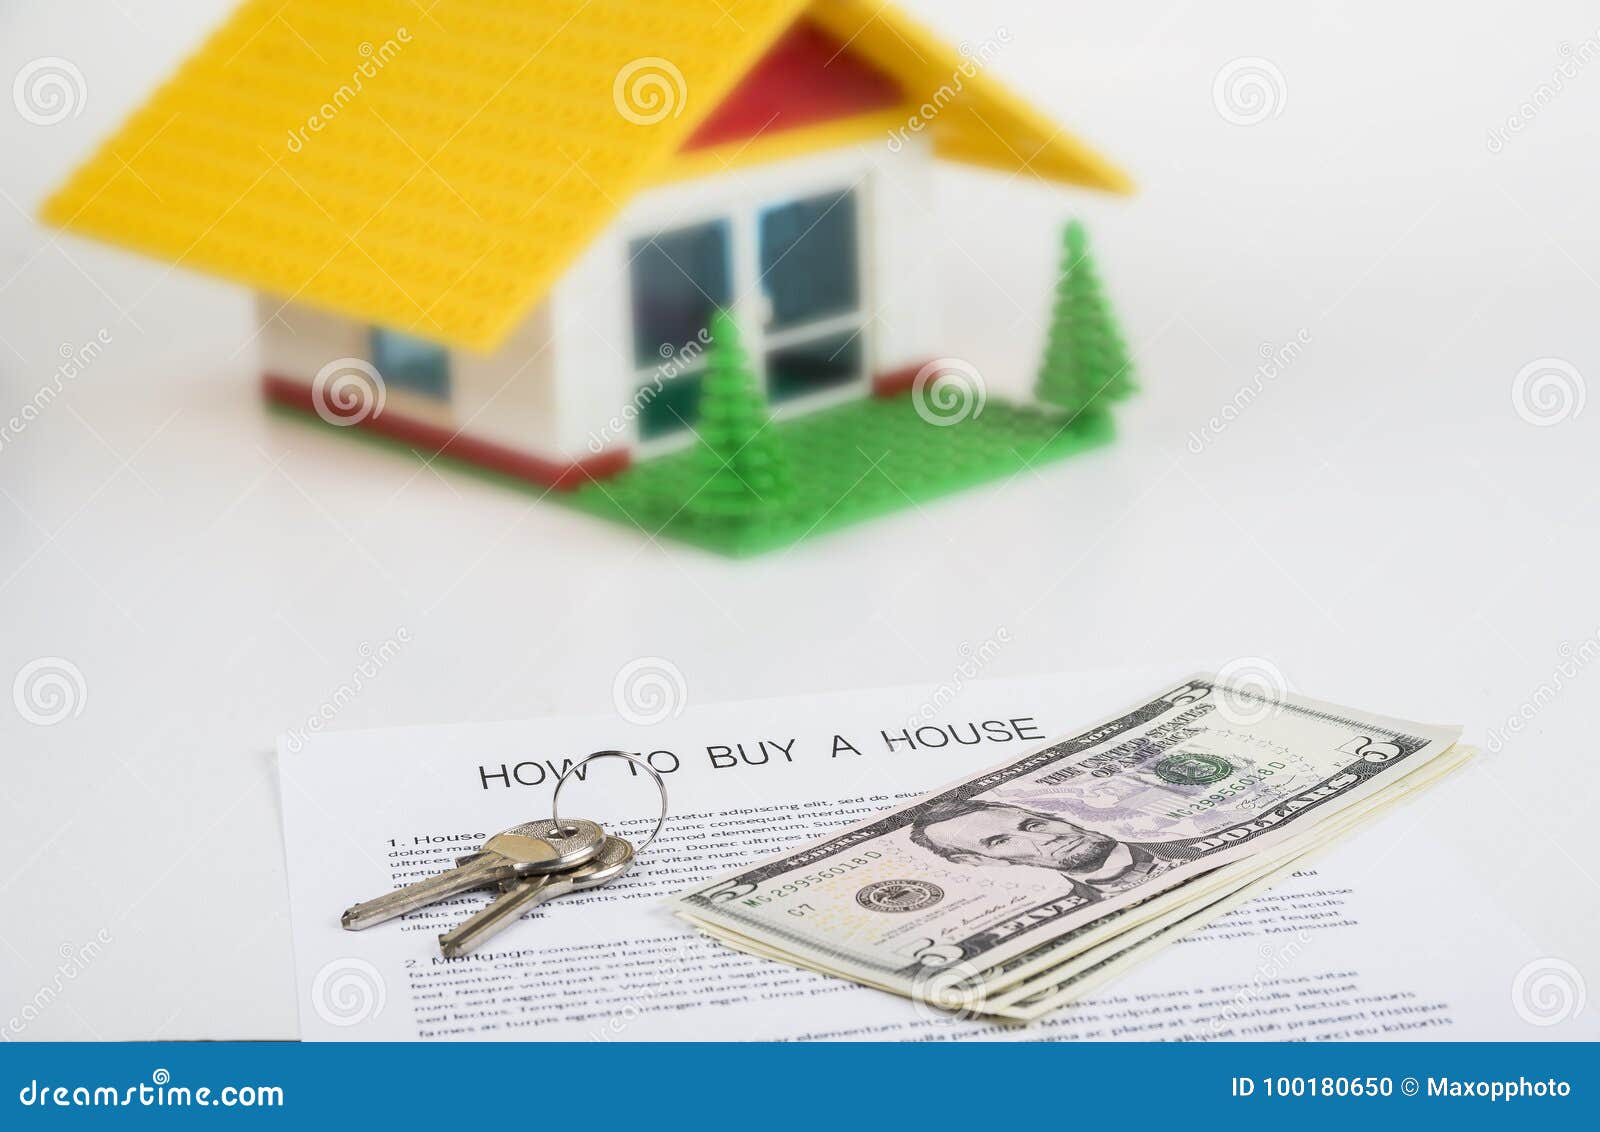 can i buy a house with cash